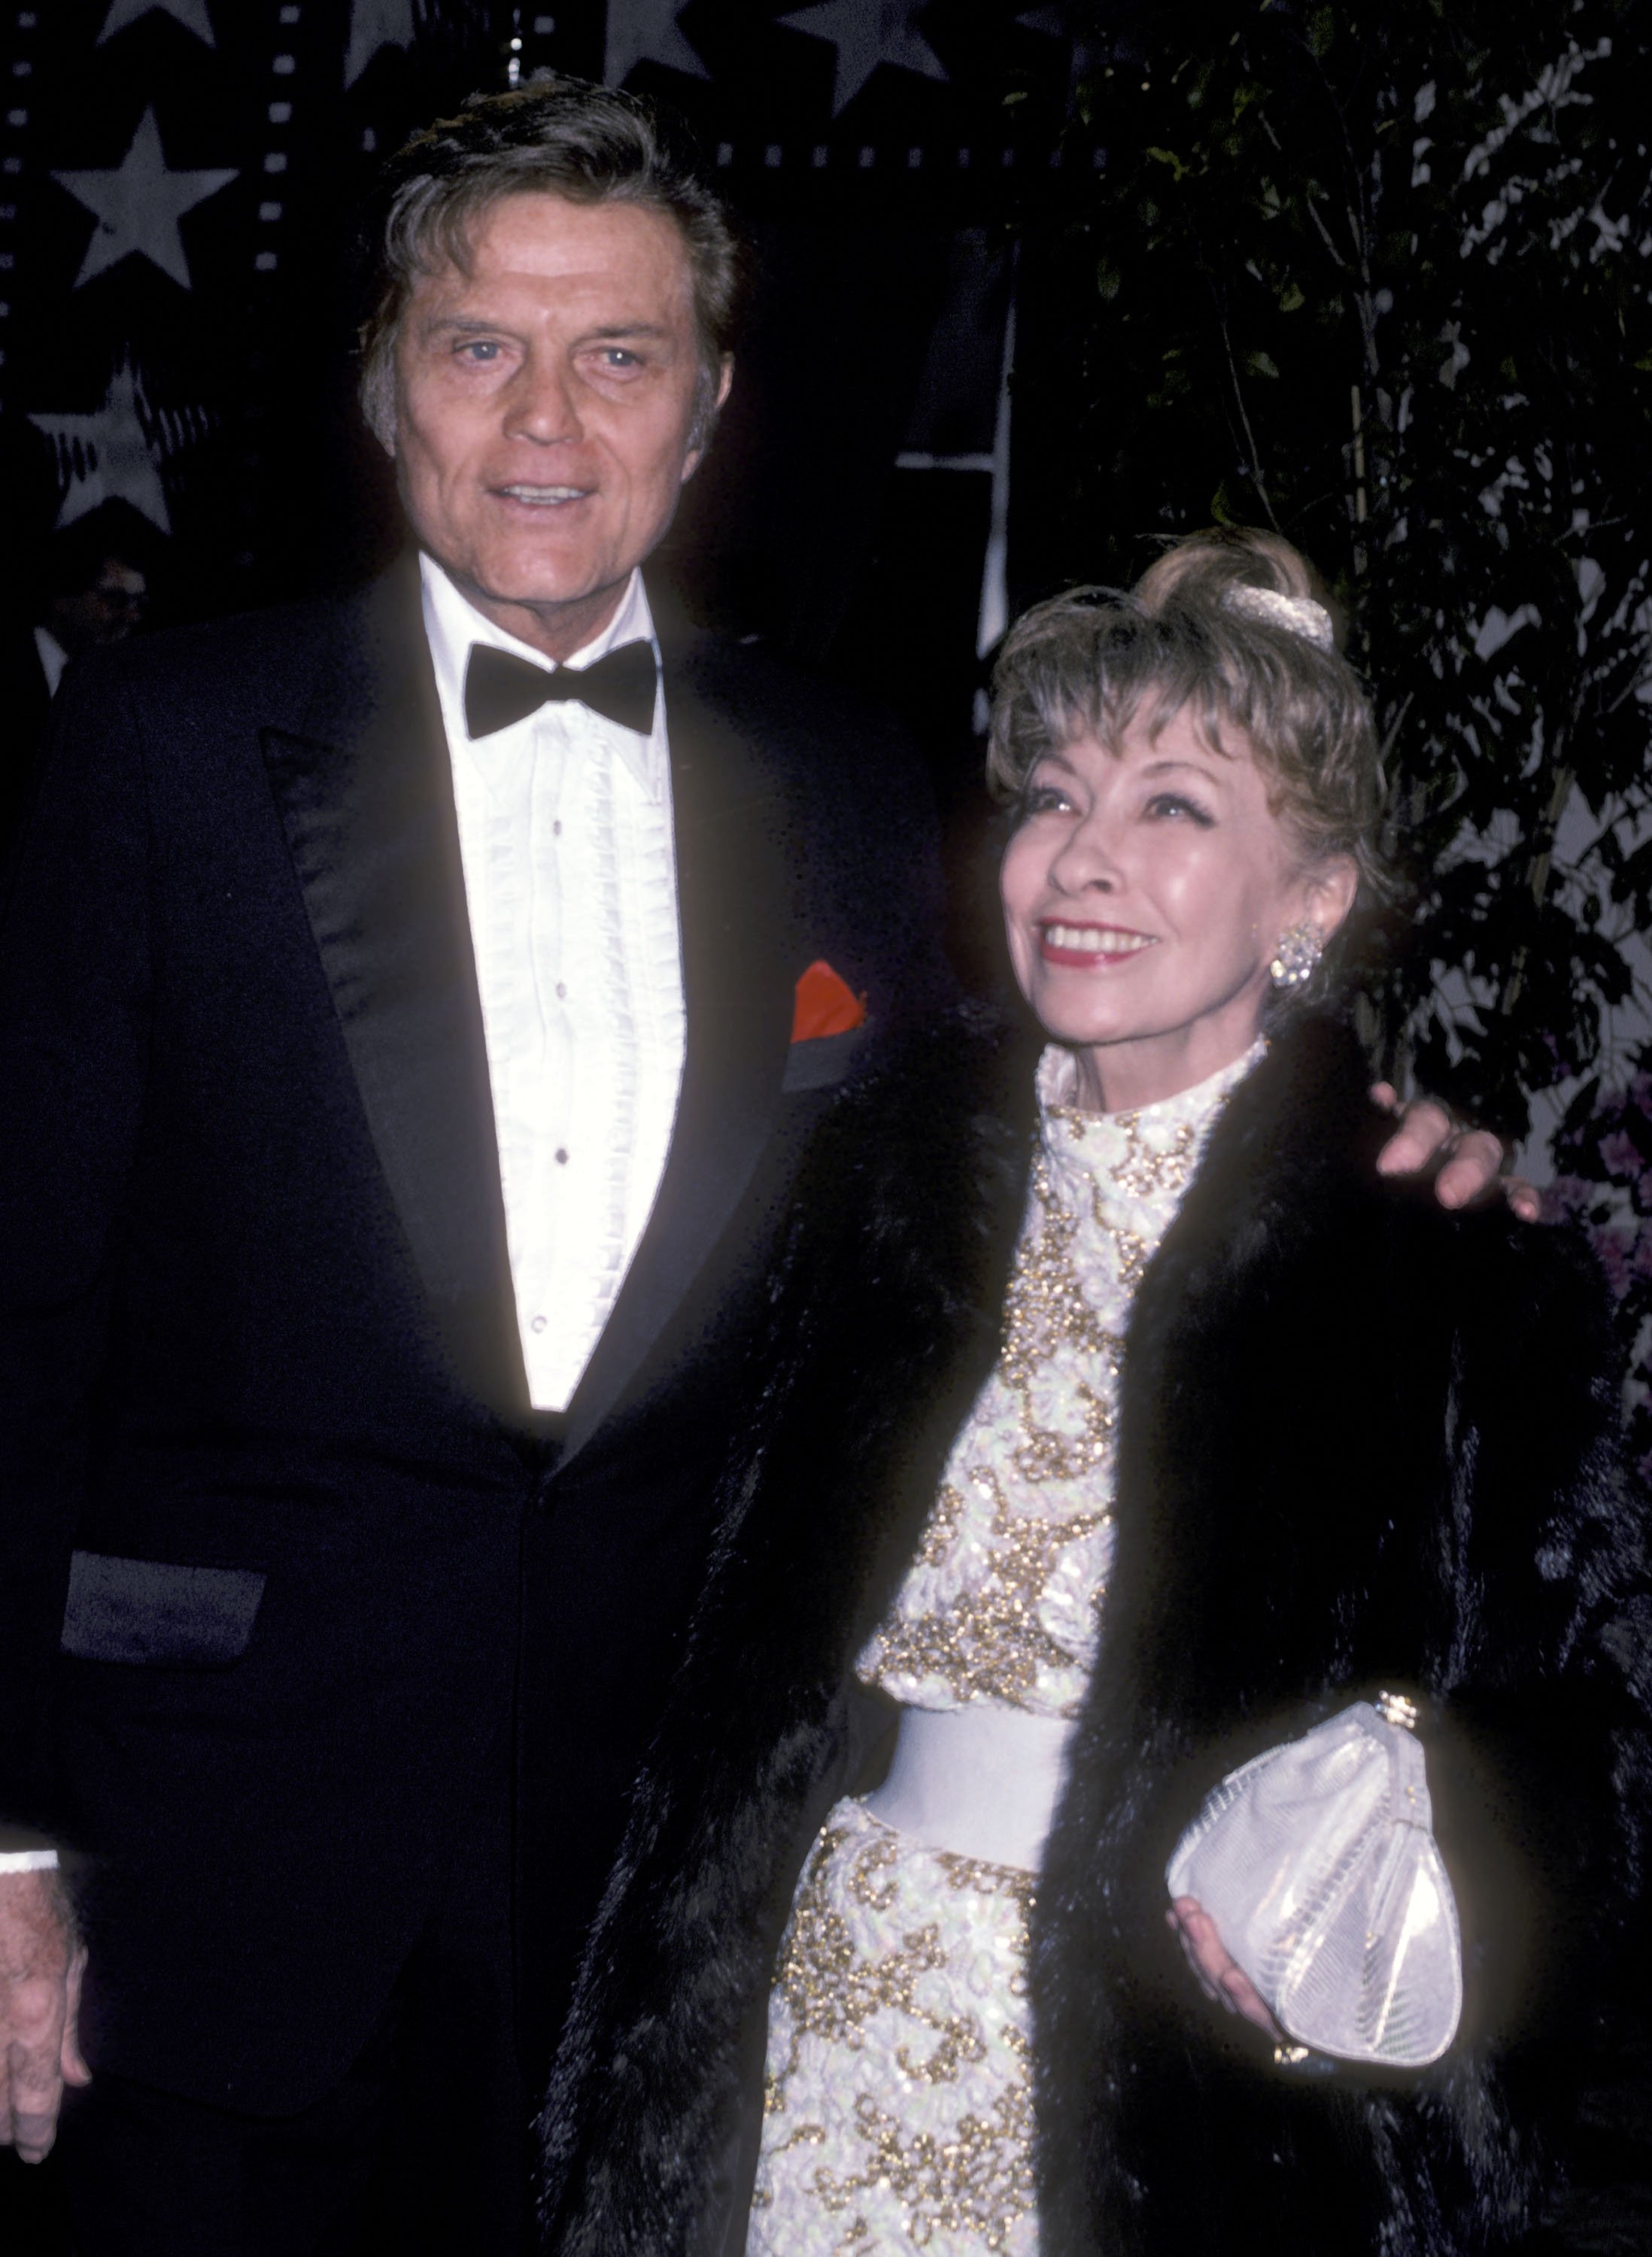 Actor Jack Lord and wife Marie Denarde attend the 13th Annual American Film Institute (AFI) Lifetime Achievement Award Salute to Gene Kelly on March 7, 1985 at Beverly Hilton Hotel in Beverly Hills, California. | Source: Getty Images